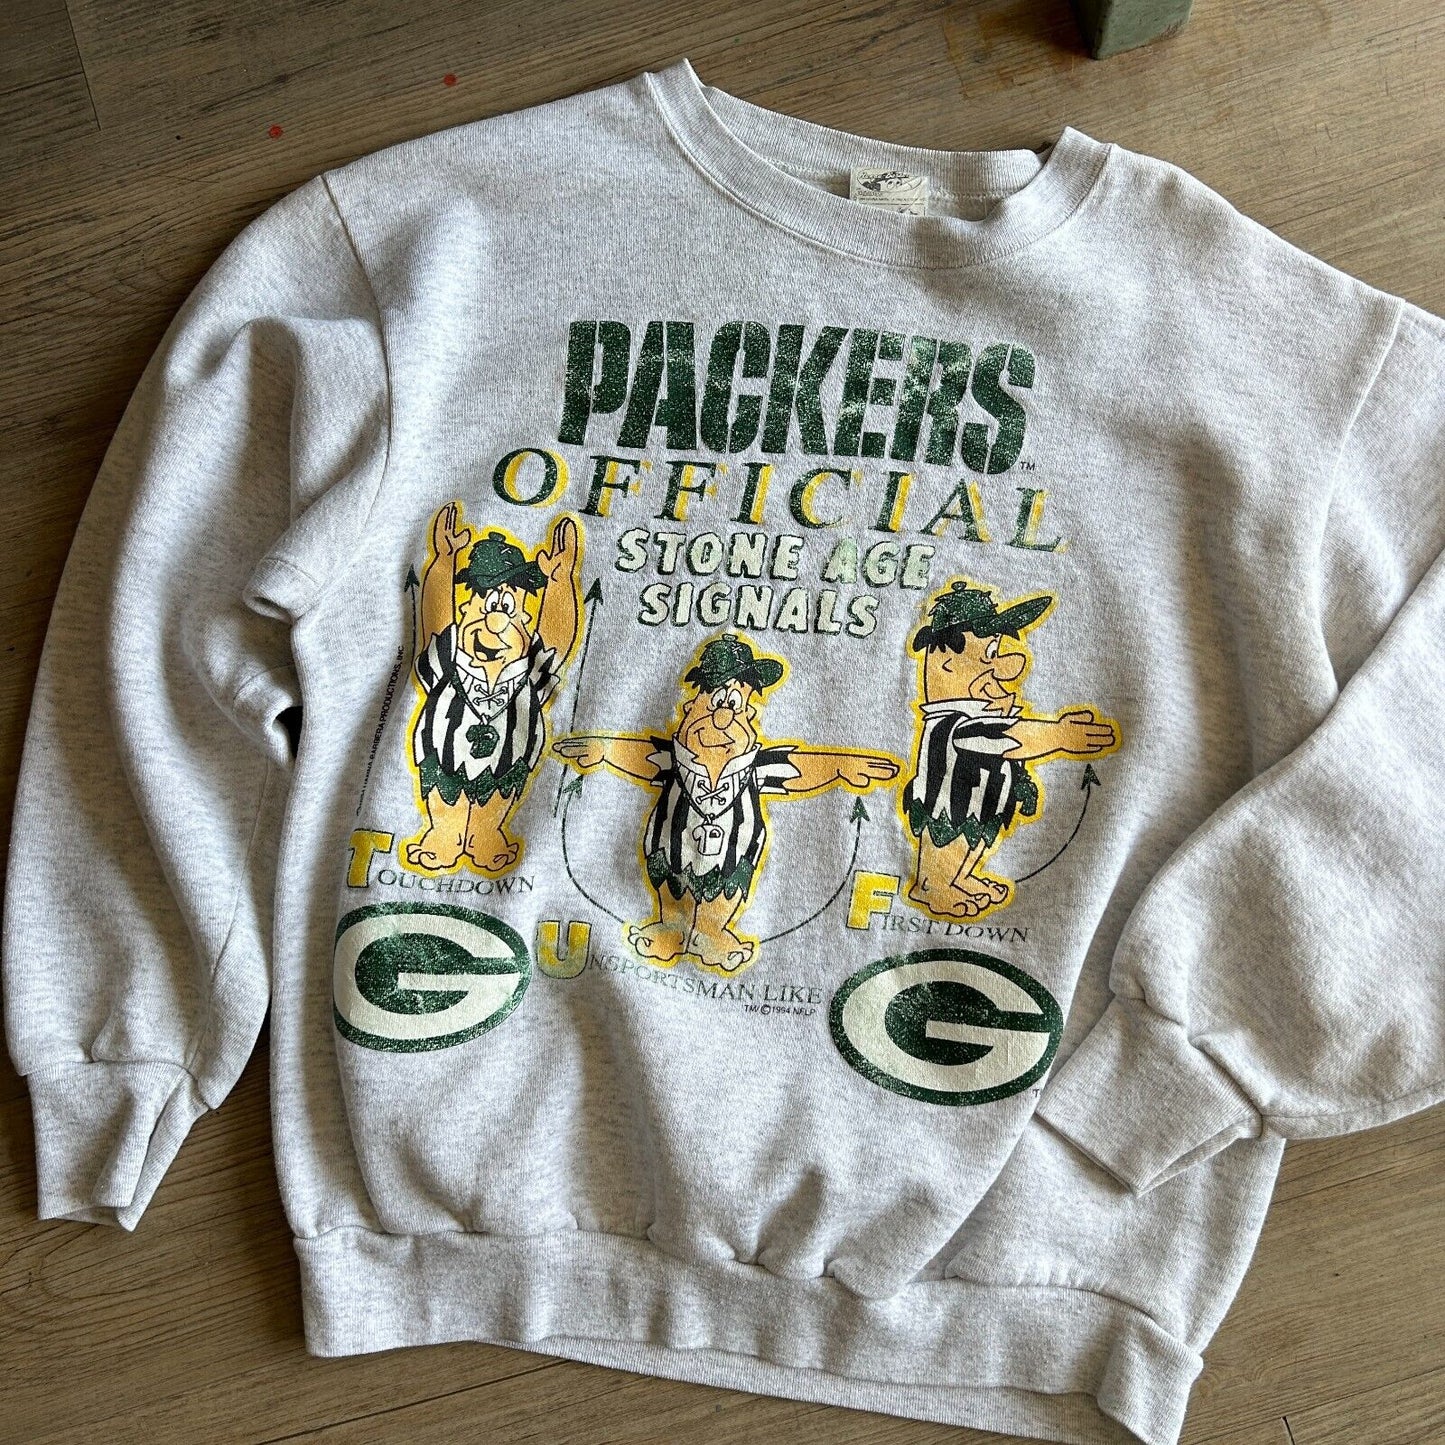 VINTAGE 90s | Green Bay Packers Stone Age Signals Sweater sz M Adult